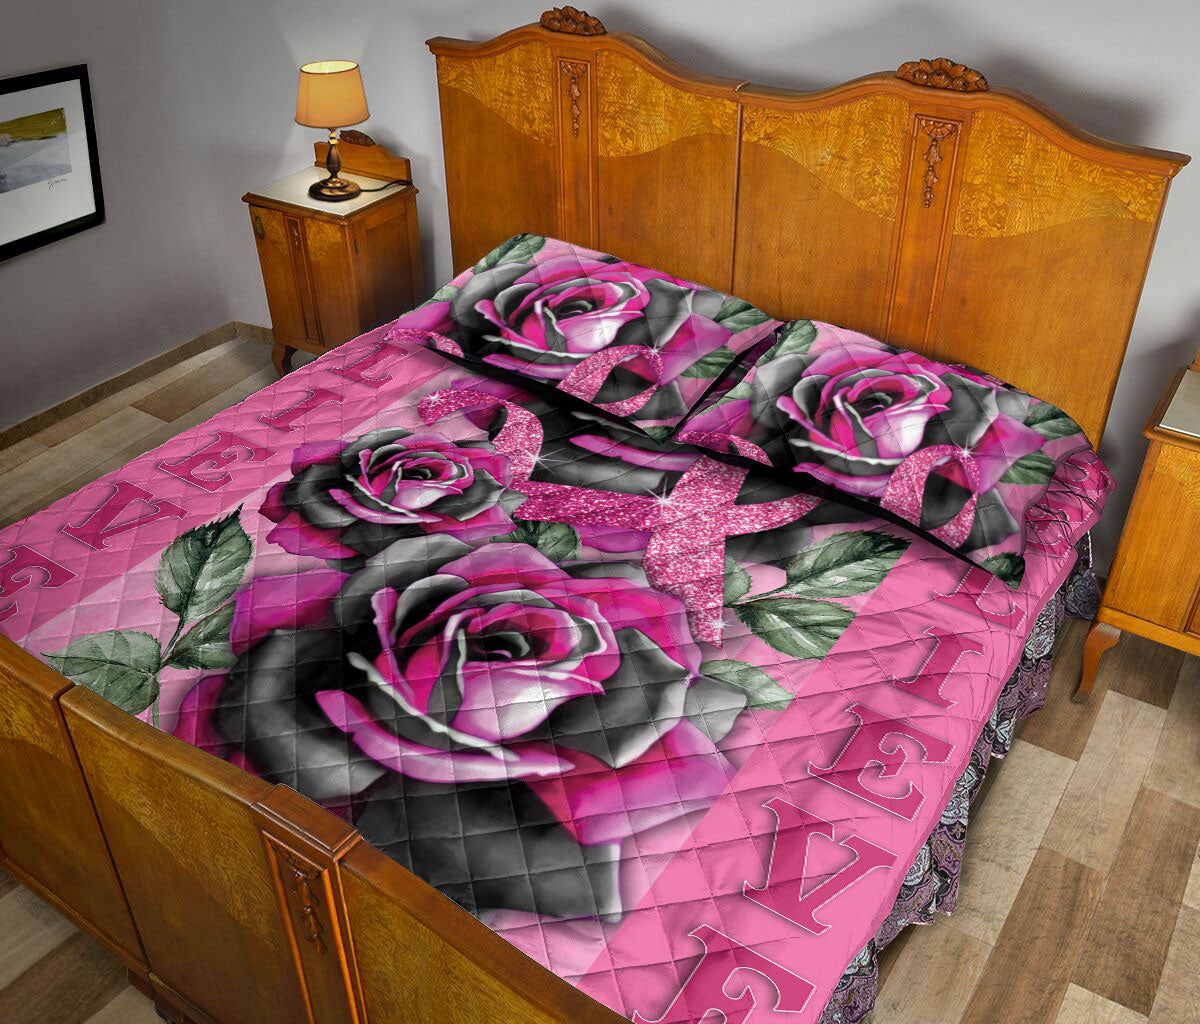 Ohaprints-Quilt-Bed-Set-Pillowcase-Breast-Cancer-Awareness-Pink-Rose-Floral-Pattern-Get-Well-Soon-Gift-Blanket-Bedspread-Bedding-2543-Queen (80'' x 90'')